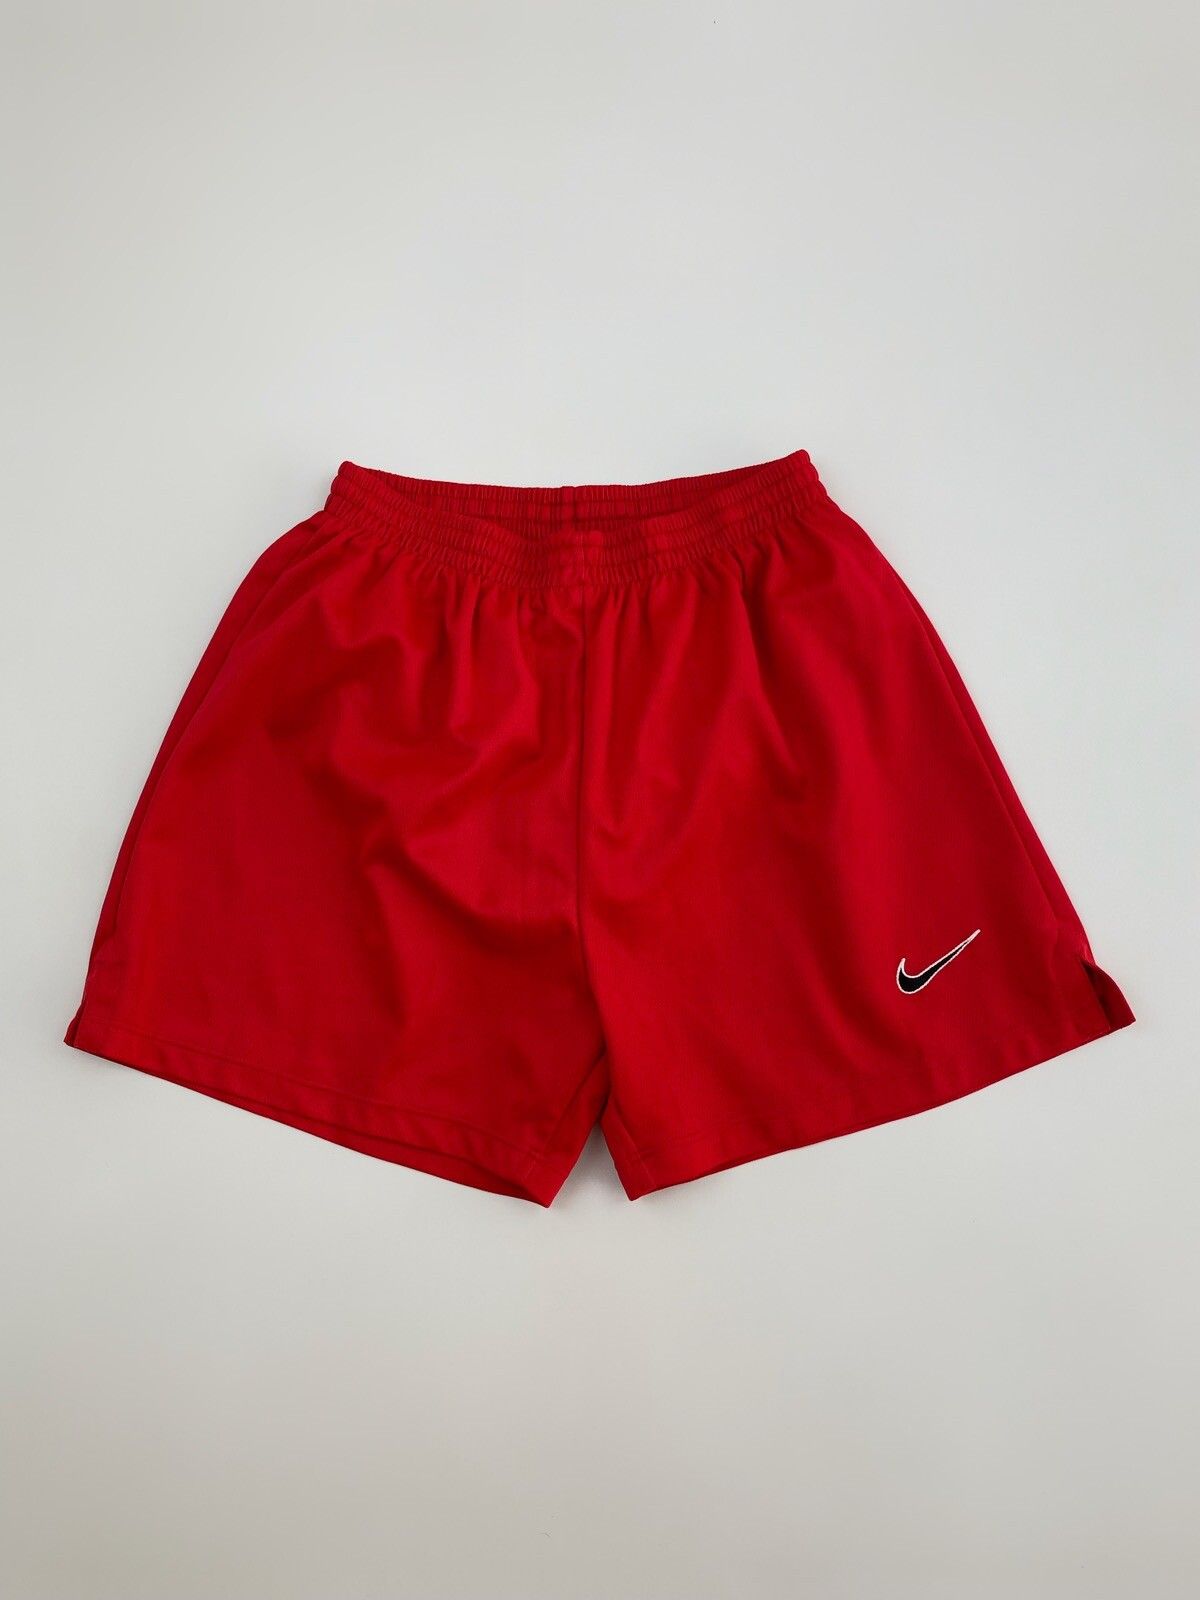 Pre-owned Nike X Vintage 1990's Vintage Nike Red Sports Shorts